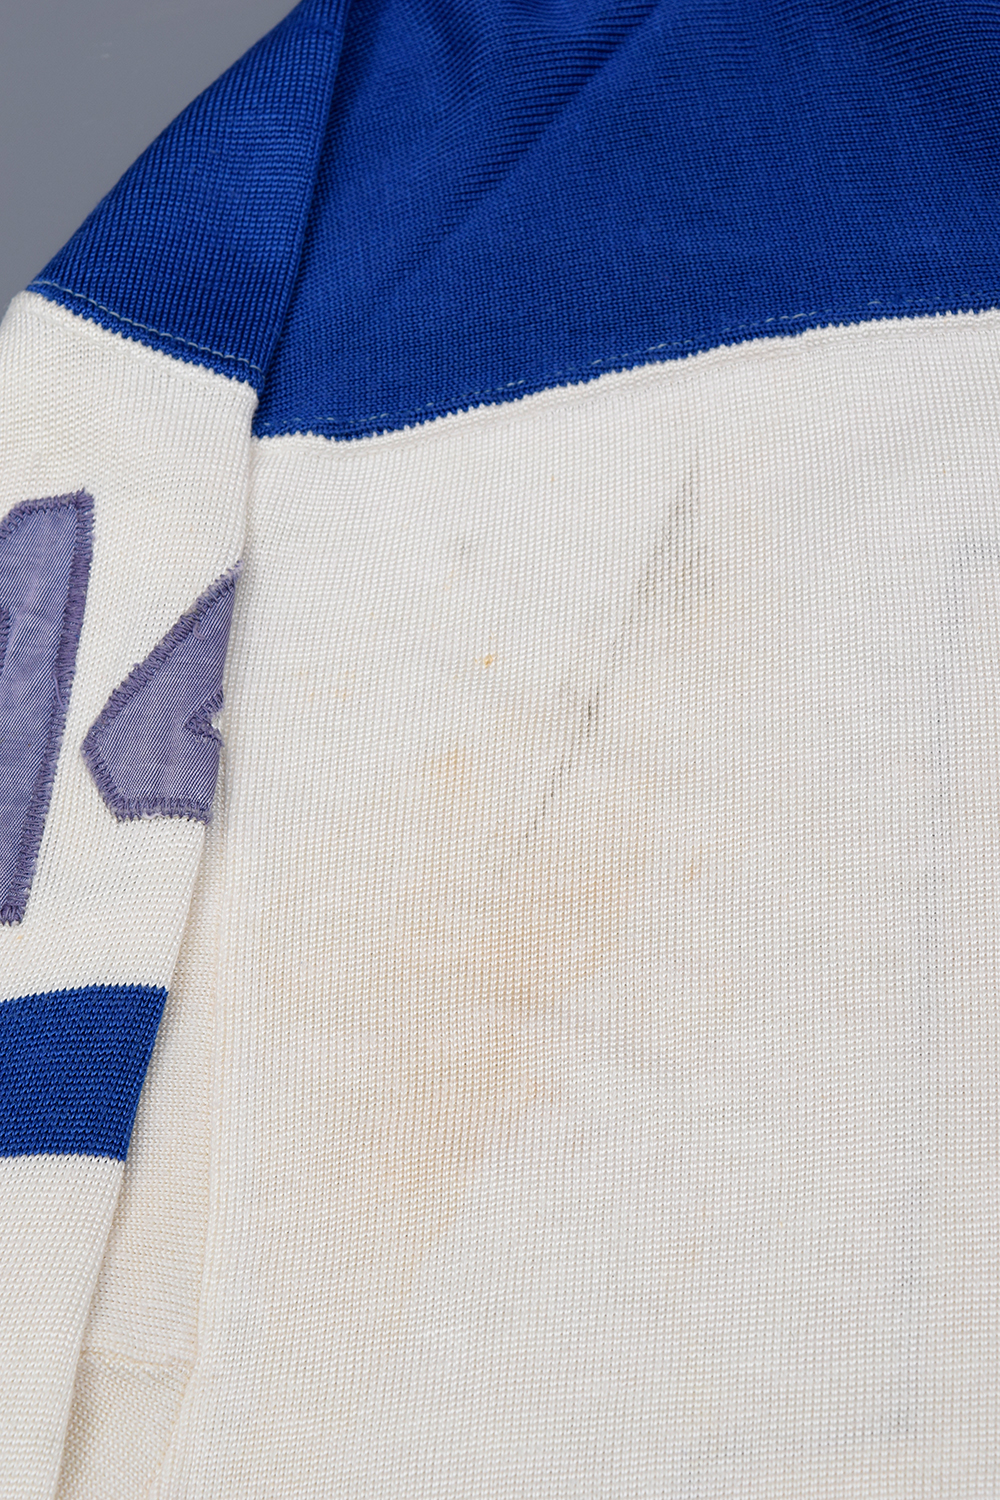 Lot 159 Dave Keon's Circa 1963-64 Toronto Maple Leafs Game-Worn Jersey with  LOA - Team Repairs! - Photo-Matched! on Vimeo